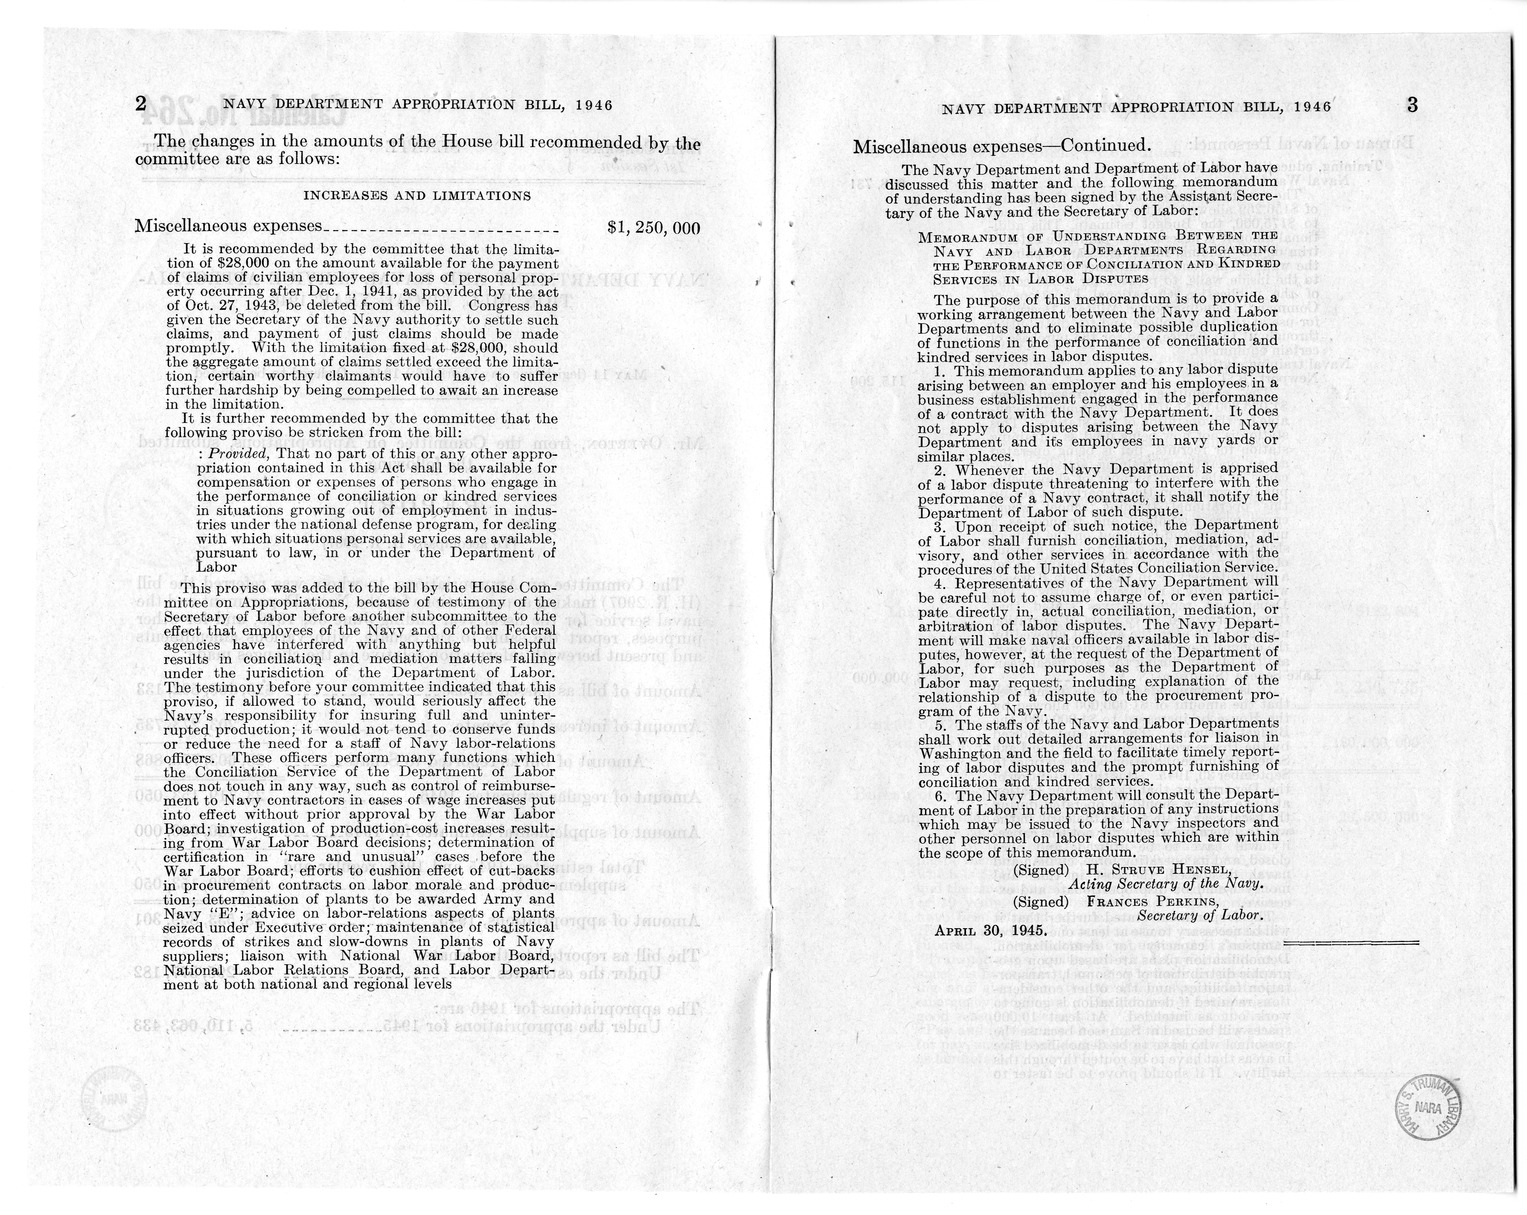 Memorandum from Harold D. Smith to M.C. Latta, H.R. 2907, Making Appropriations for the Navy Department and the Naval Service, with Attachments